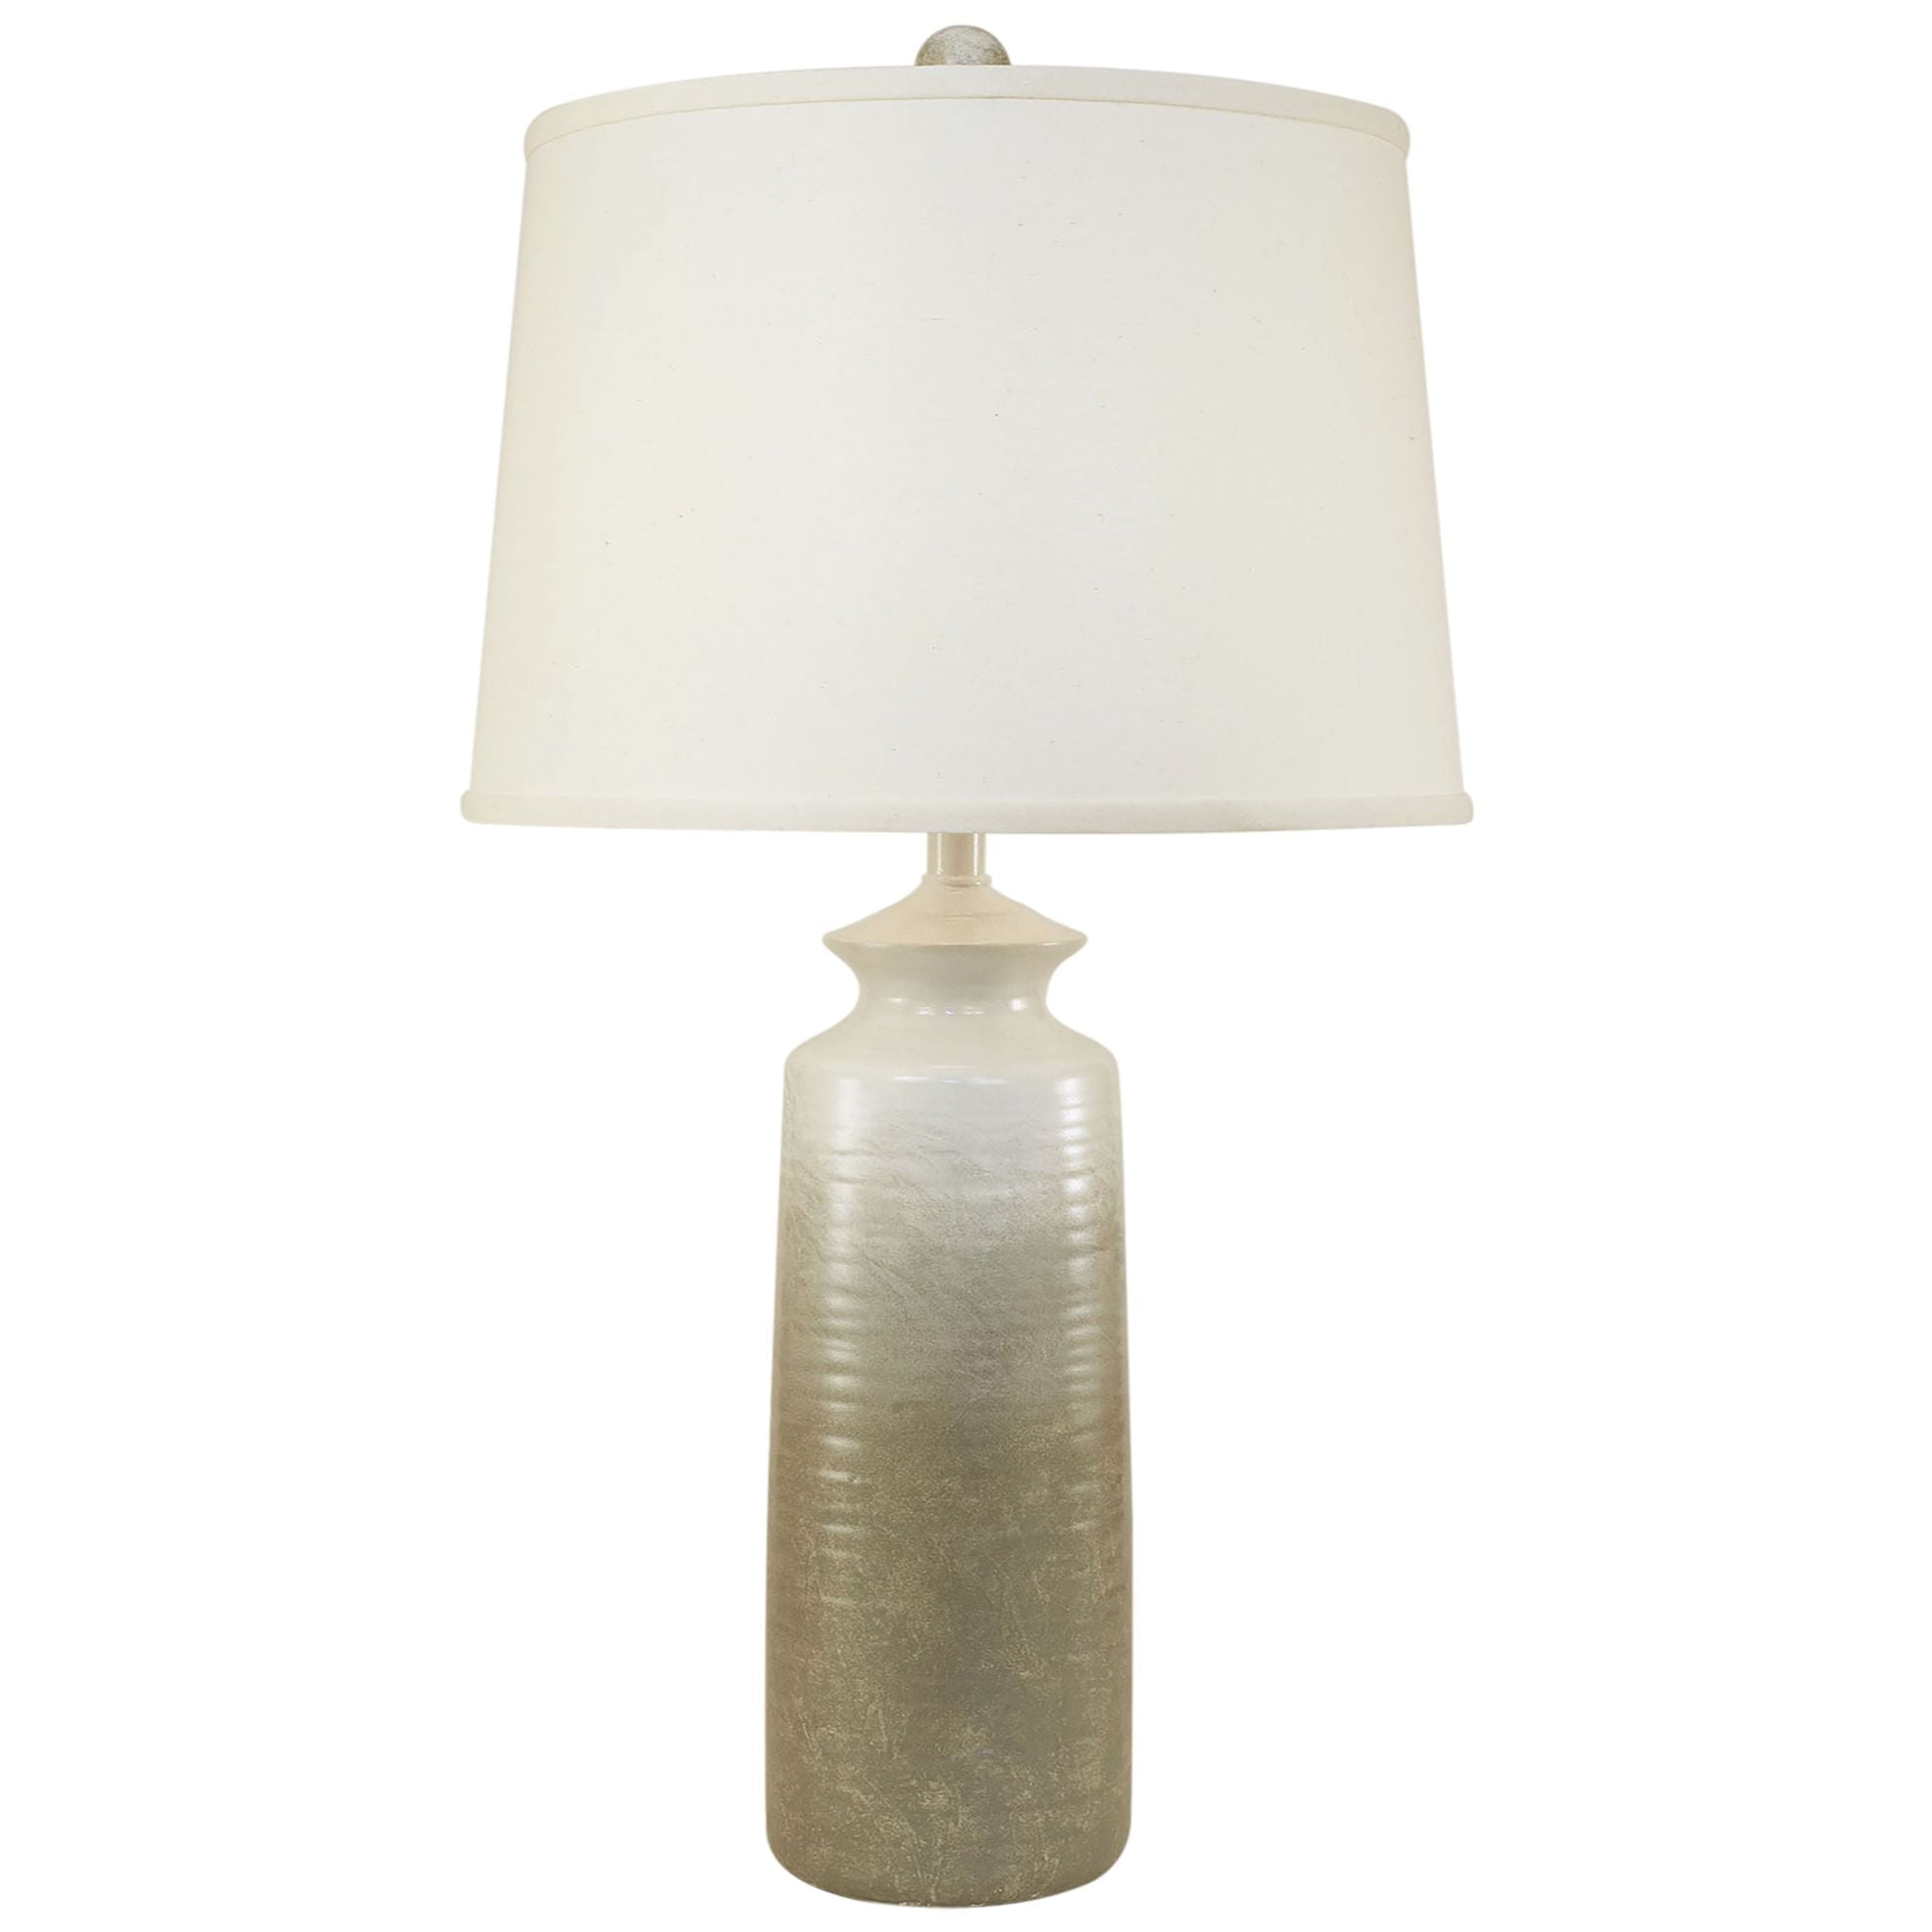 Tall Slender Pottery Table Lamp